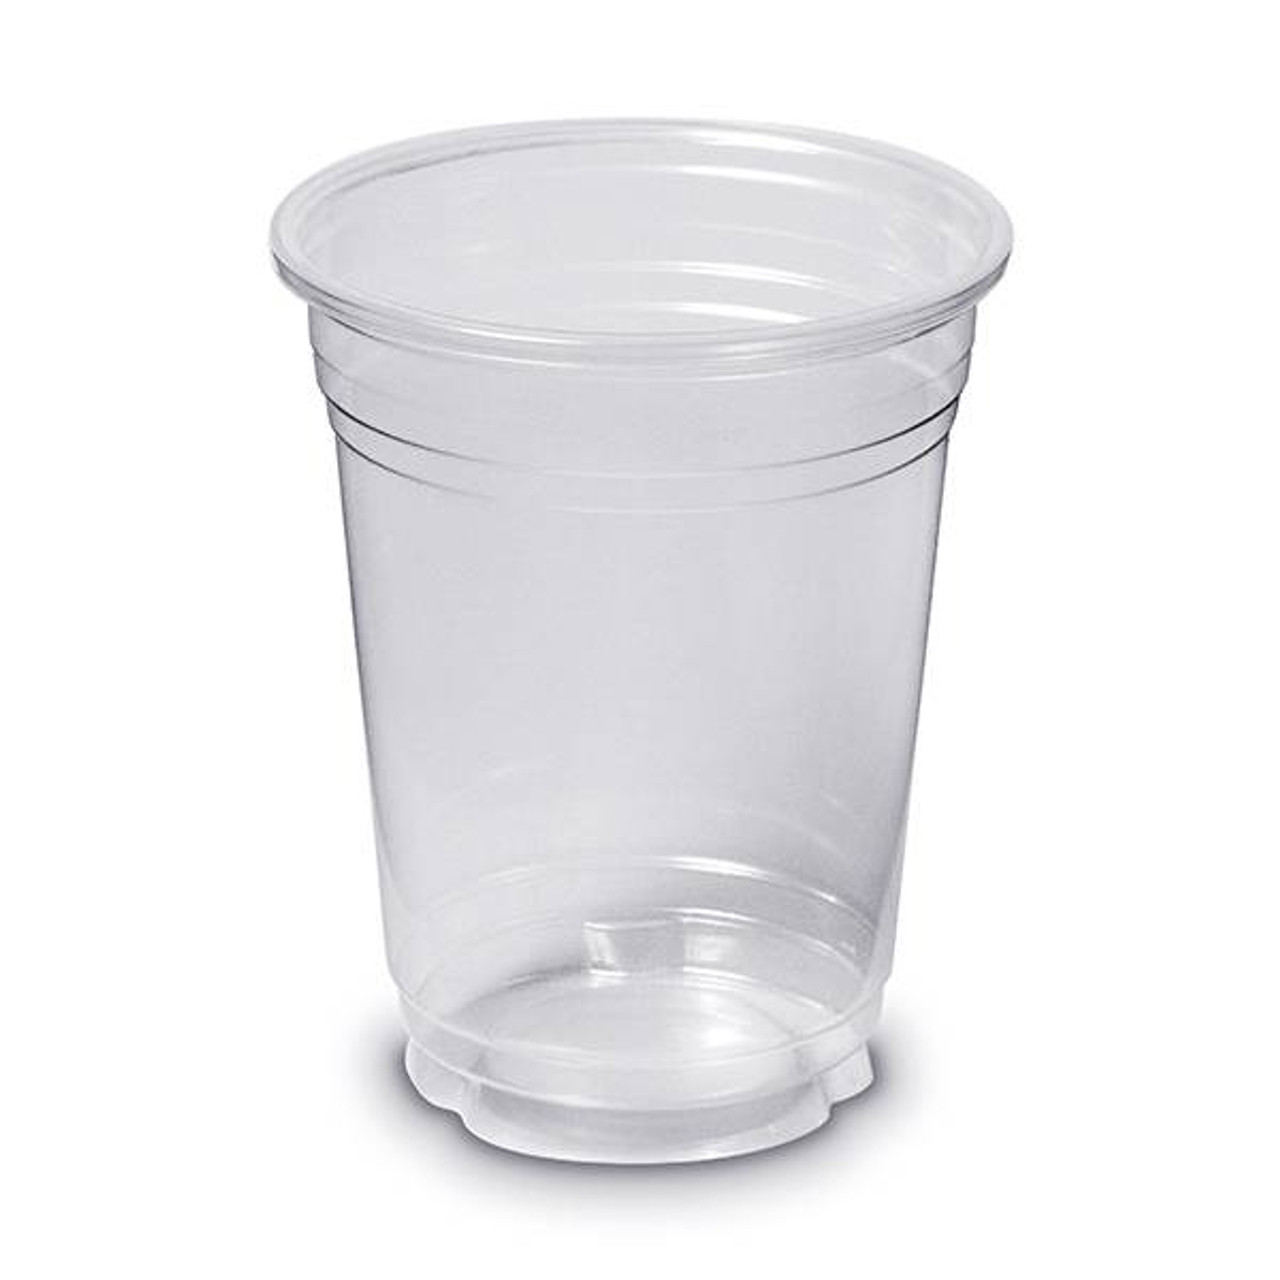 16 ounce cups, Plastic To-Go Cup, Clear, 1000 per case - J&V Restaurant